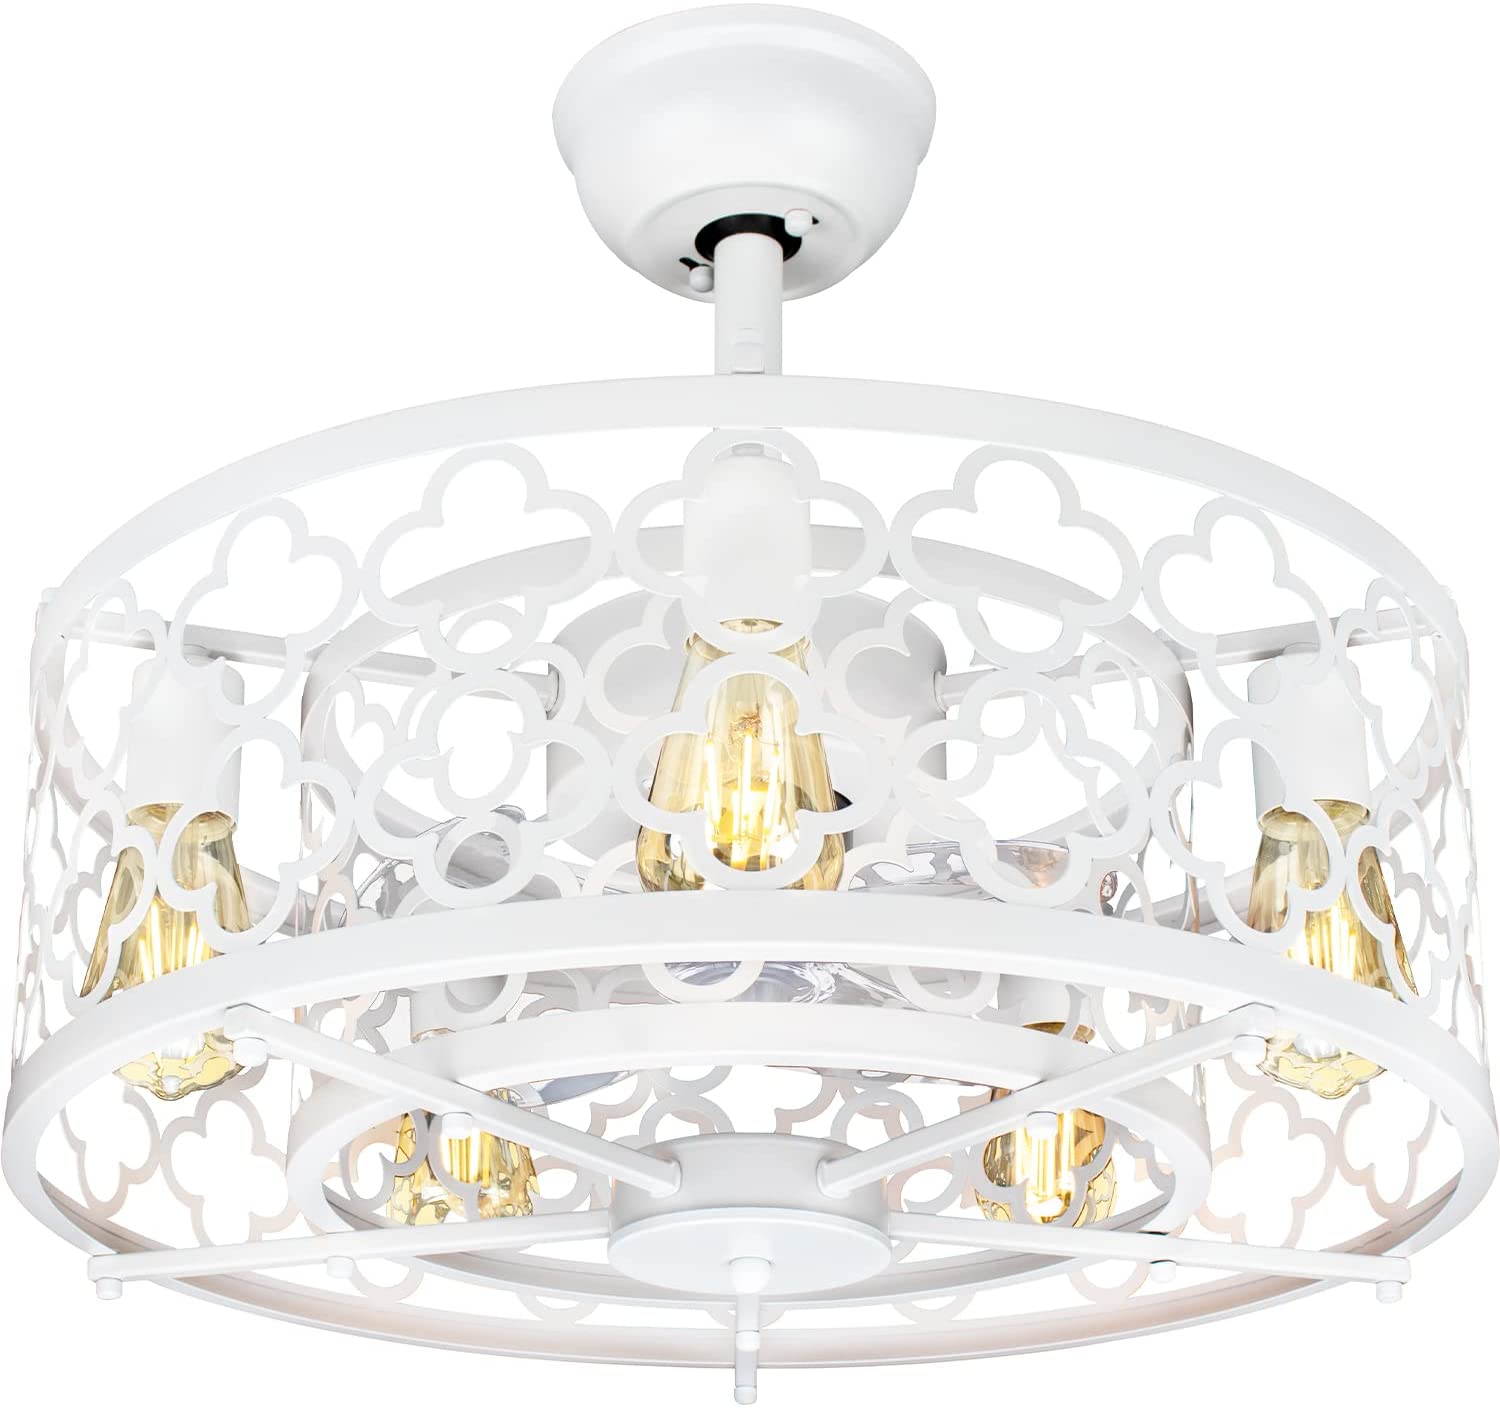 Sunvie Caged Ceiling Fan With Light